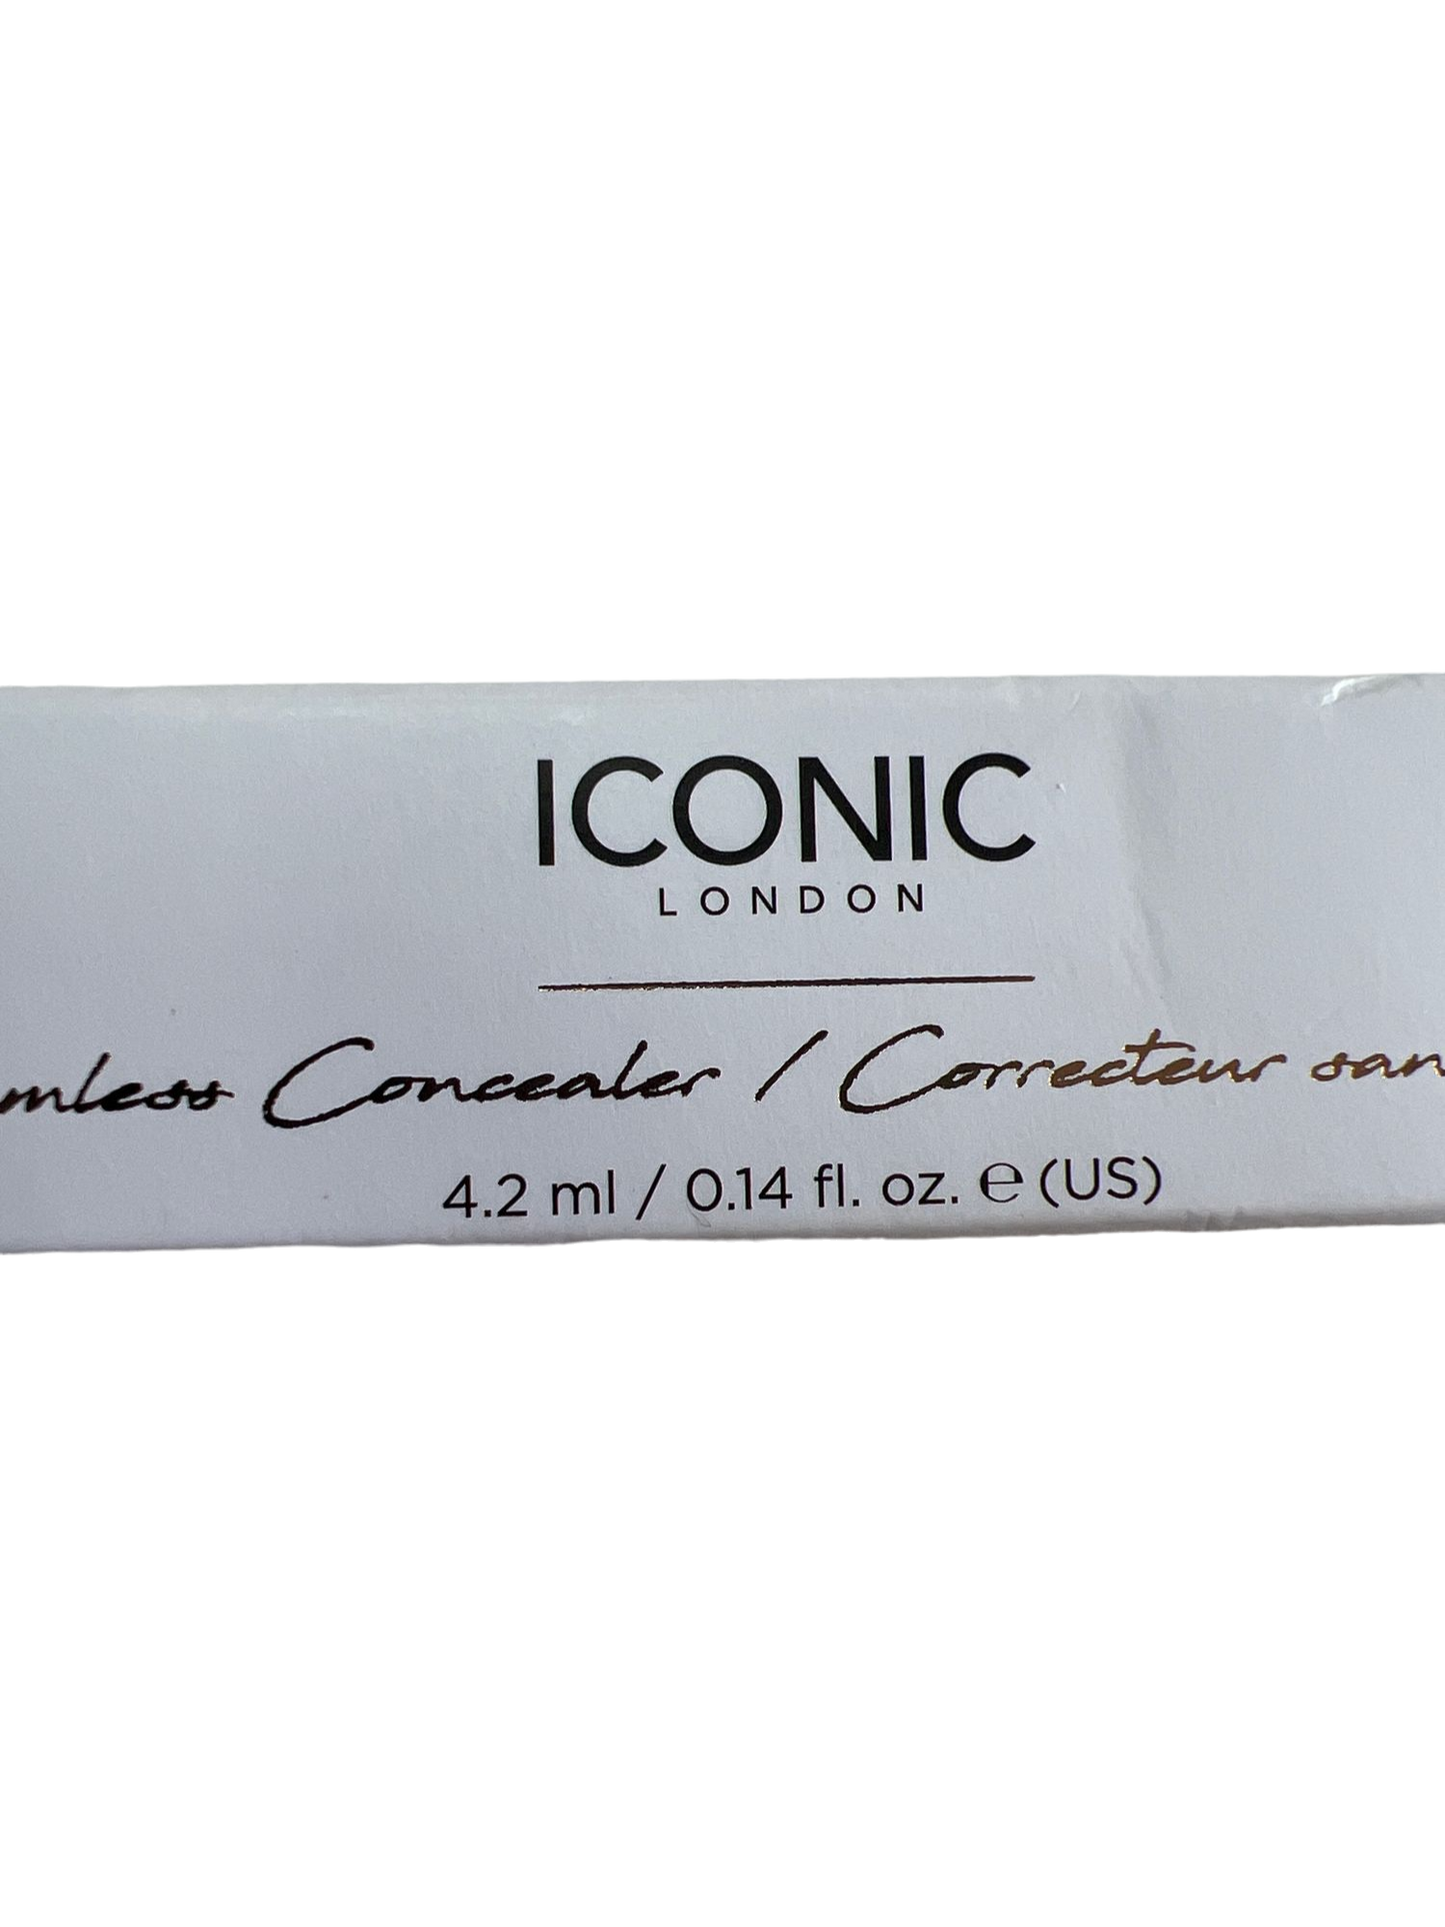 ICONIC London Seamless Concealer in Lightest Nude 4.2ml